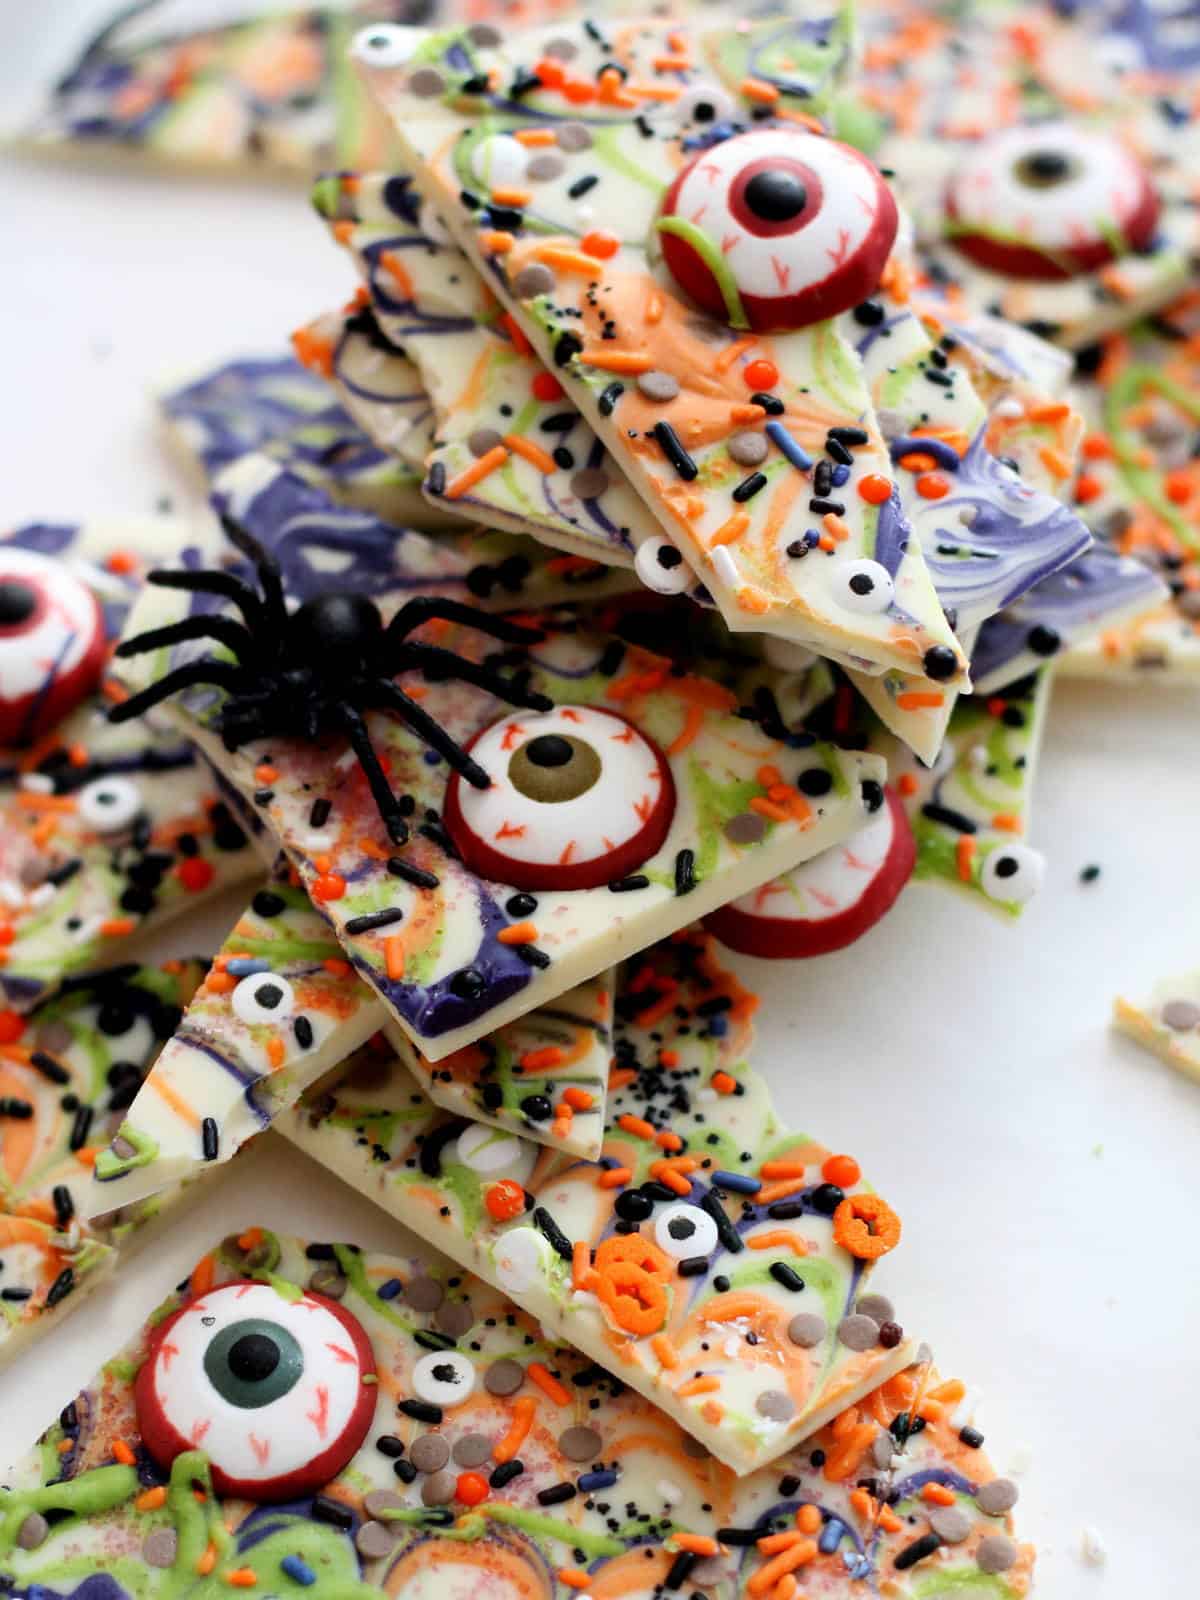 White chocolate bark with colourful sprinkles and Halloween edible decoration